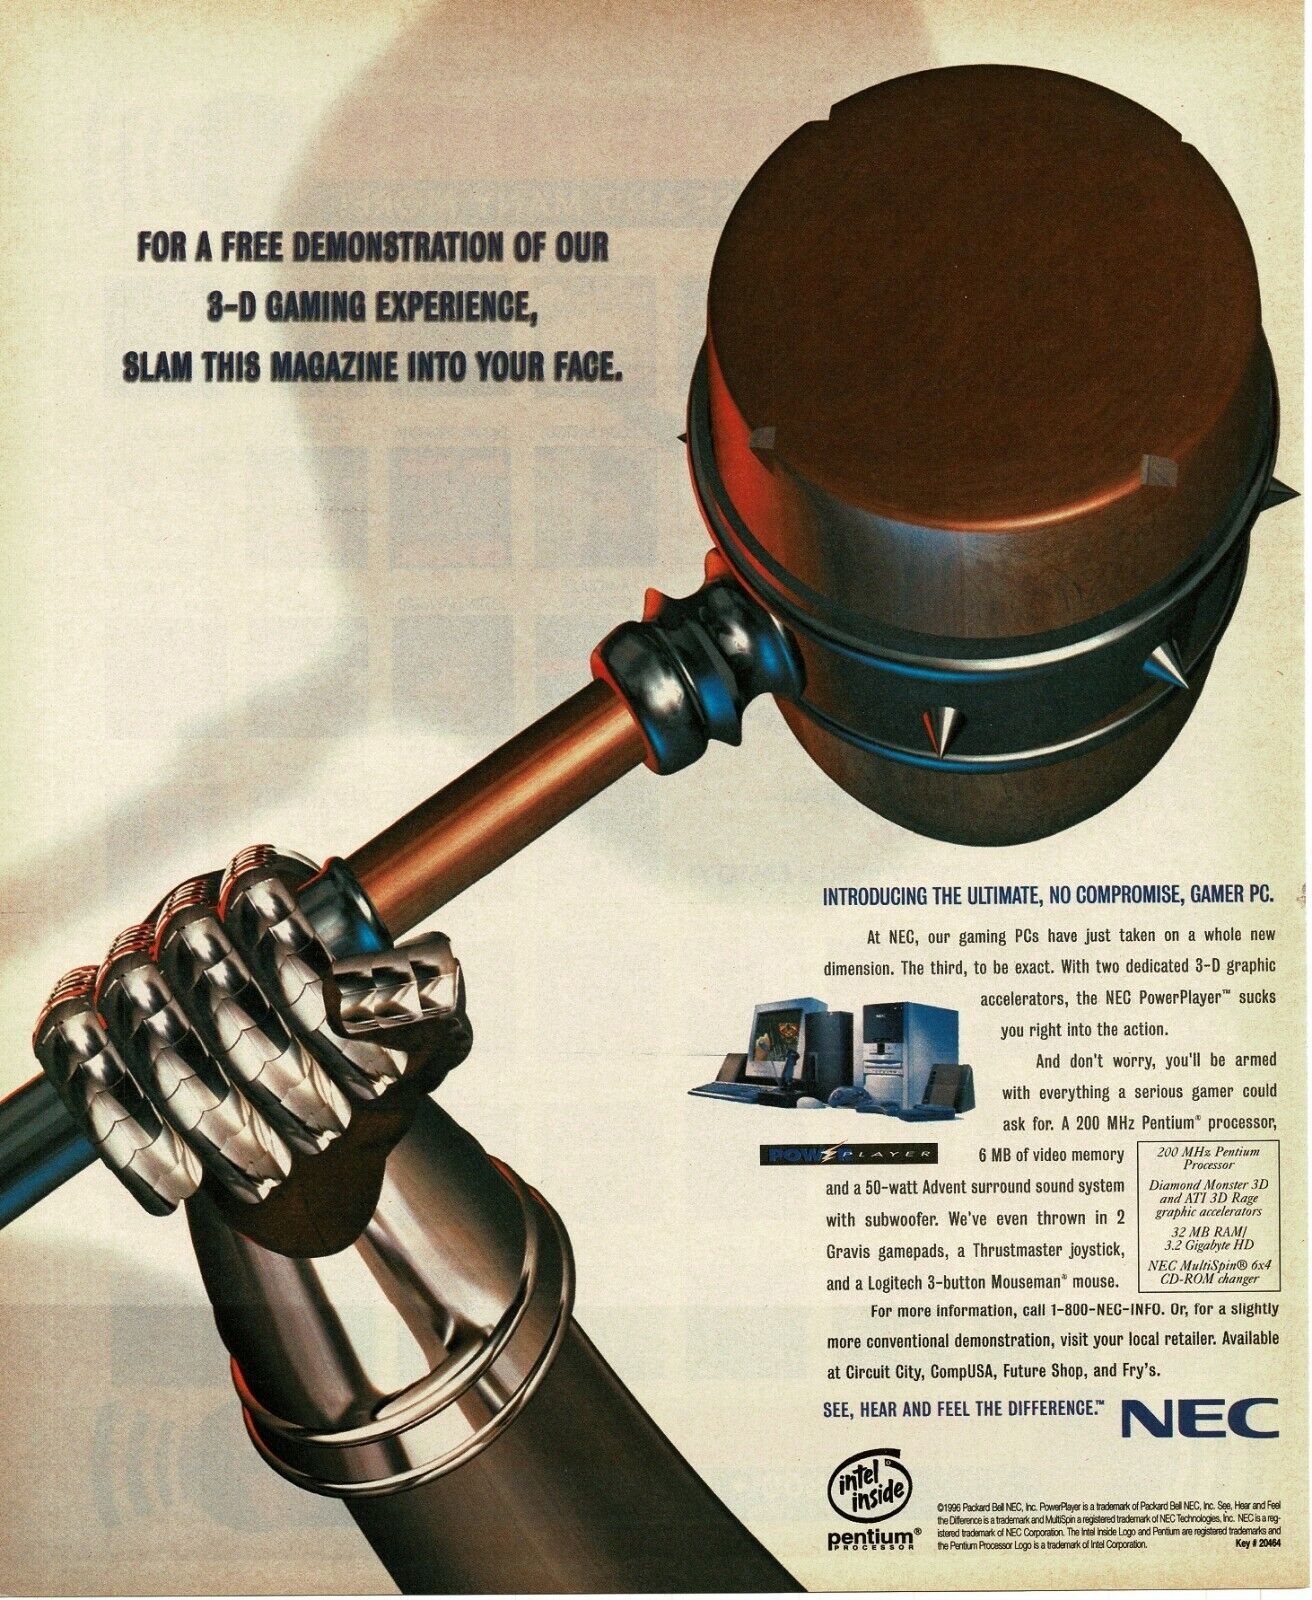 1996 NEC Gamer PC Personal Computer Vintage Print Ad